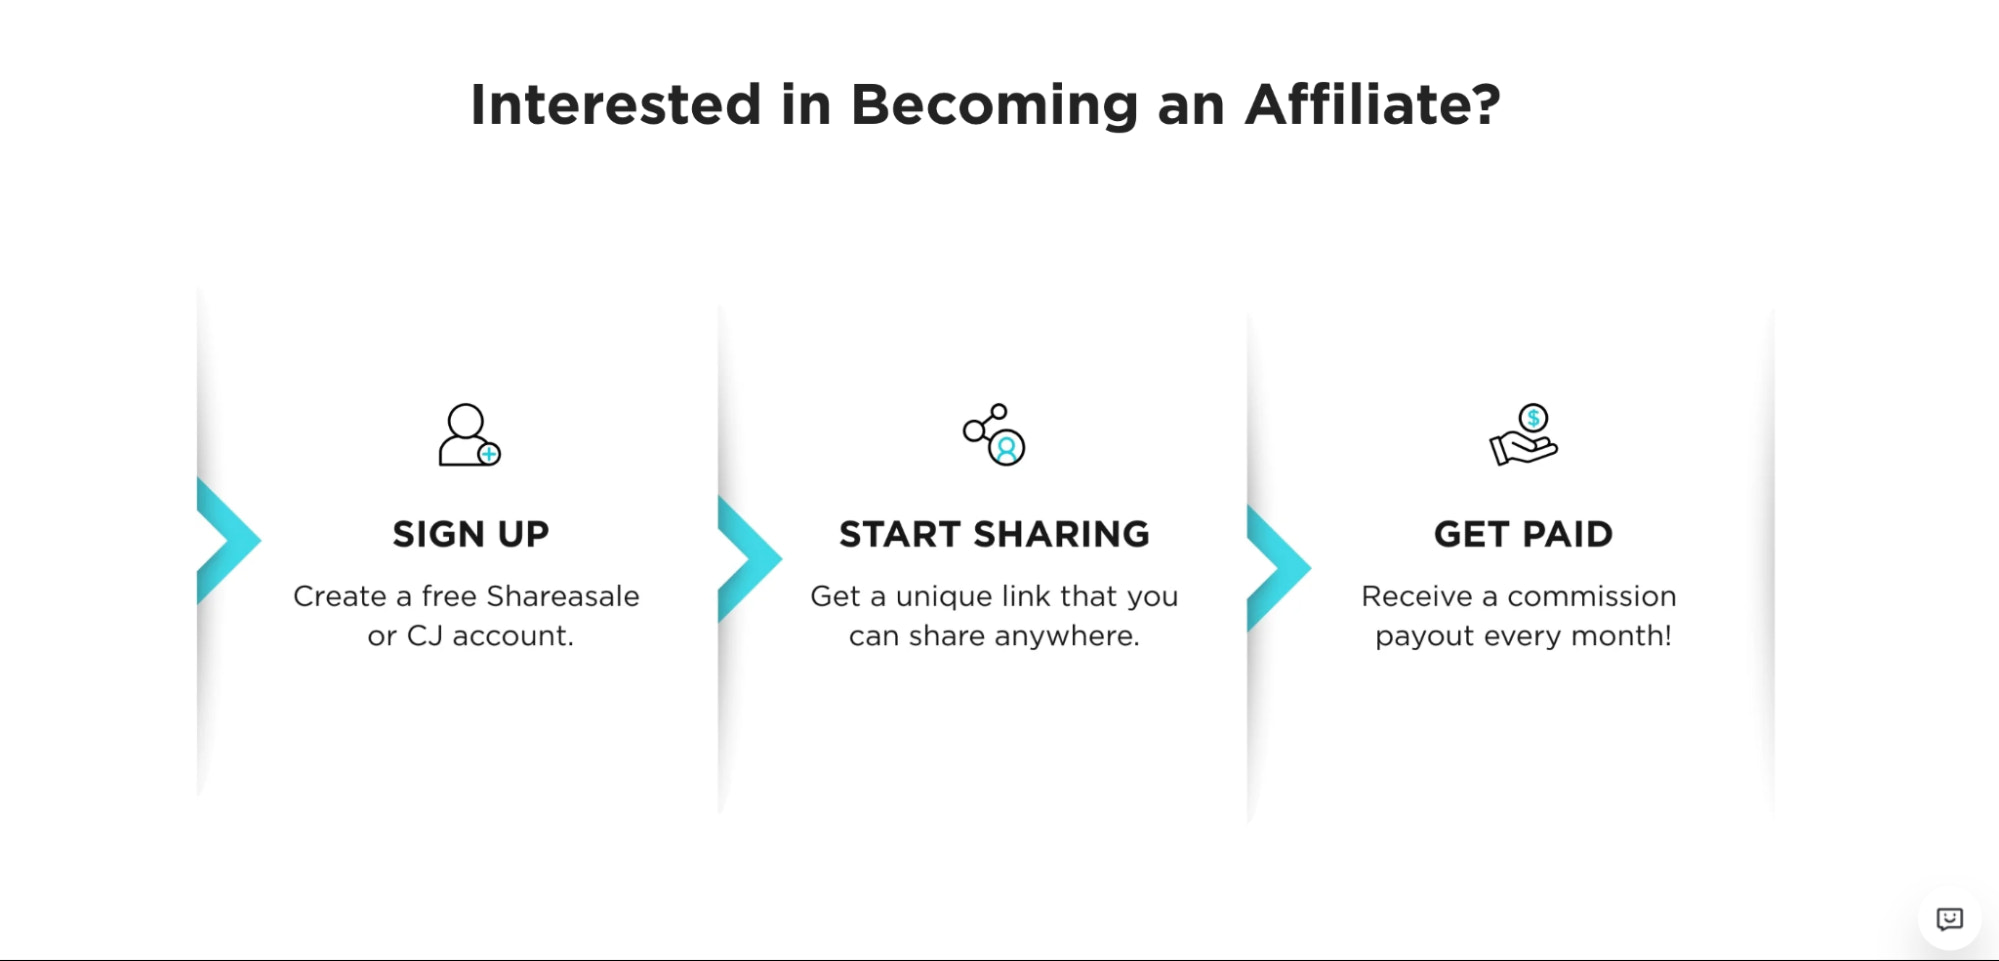 A screenshot of the EcoFlow "Interested in Becoming an Affiliate?" page